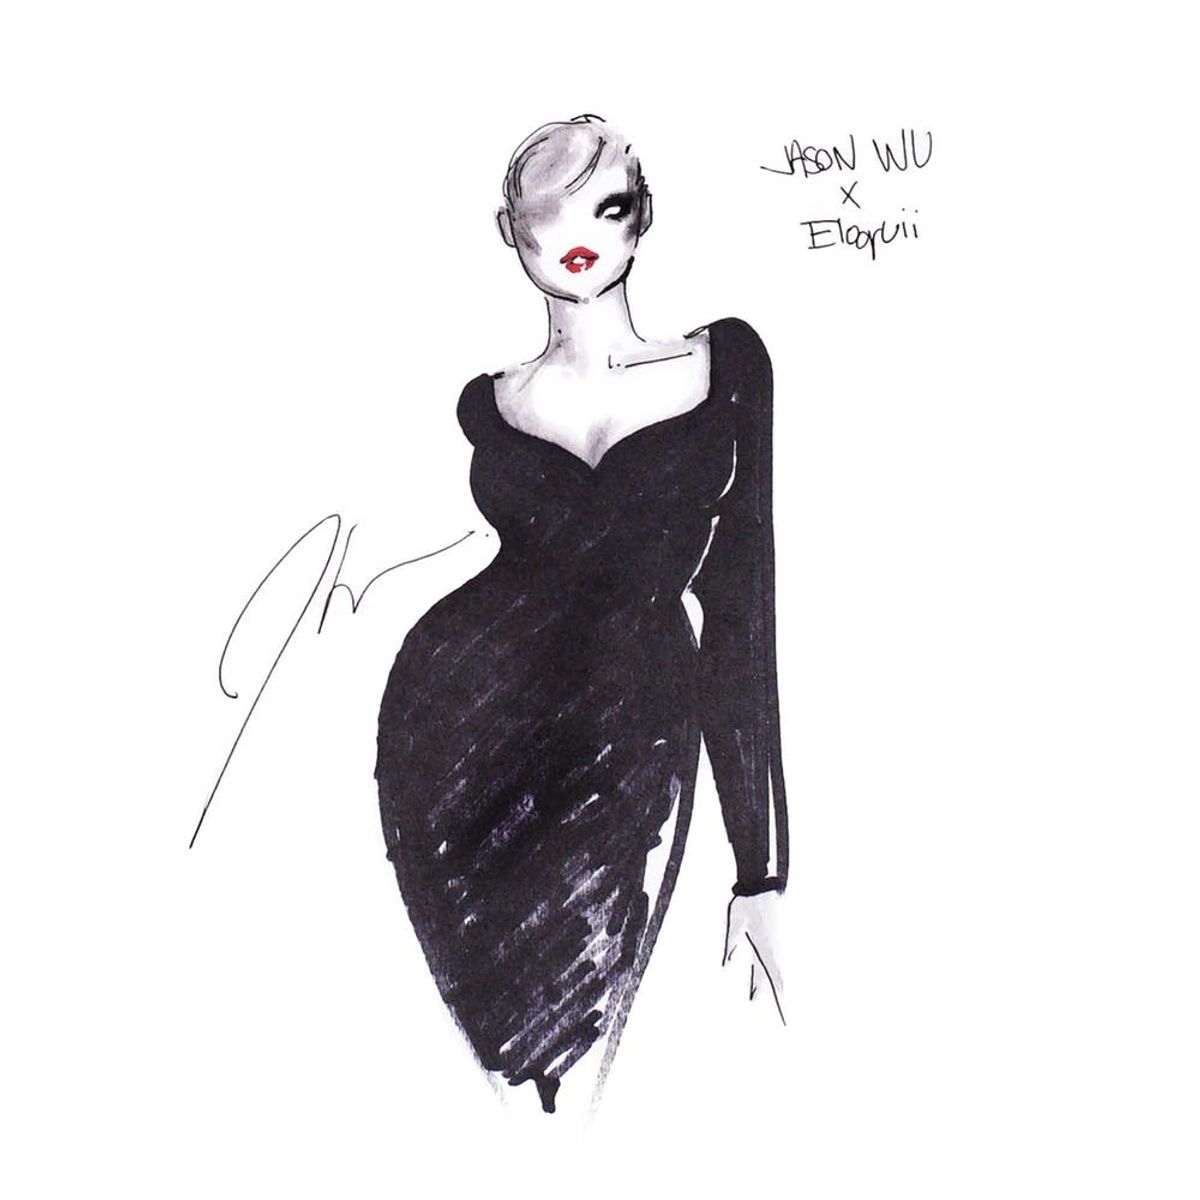 Jason Wu Is Designing an Extended Size Collection for ELOQUII